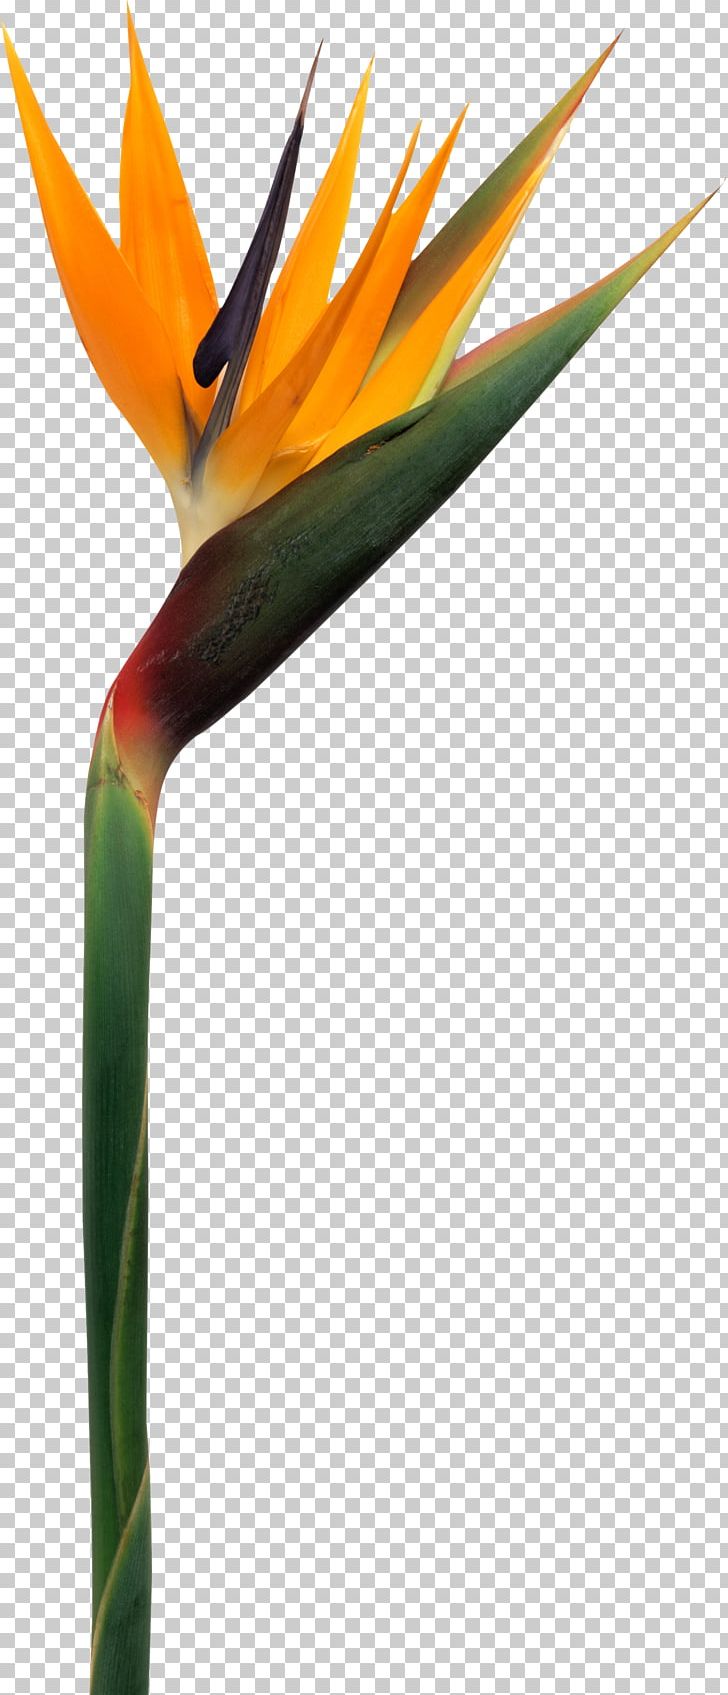 Flower Strelitzia Reginae Perfume Plant PNG, Clipart, Beak, Bird Of Paradise Flower, Bubbly, Cacharel, Drawing Free PNG Download